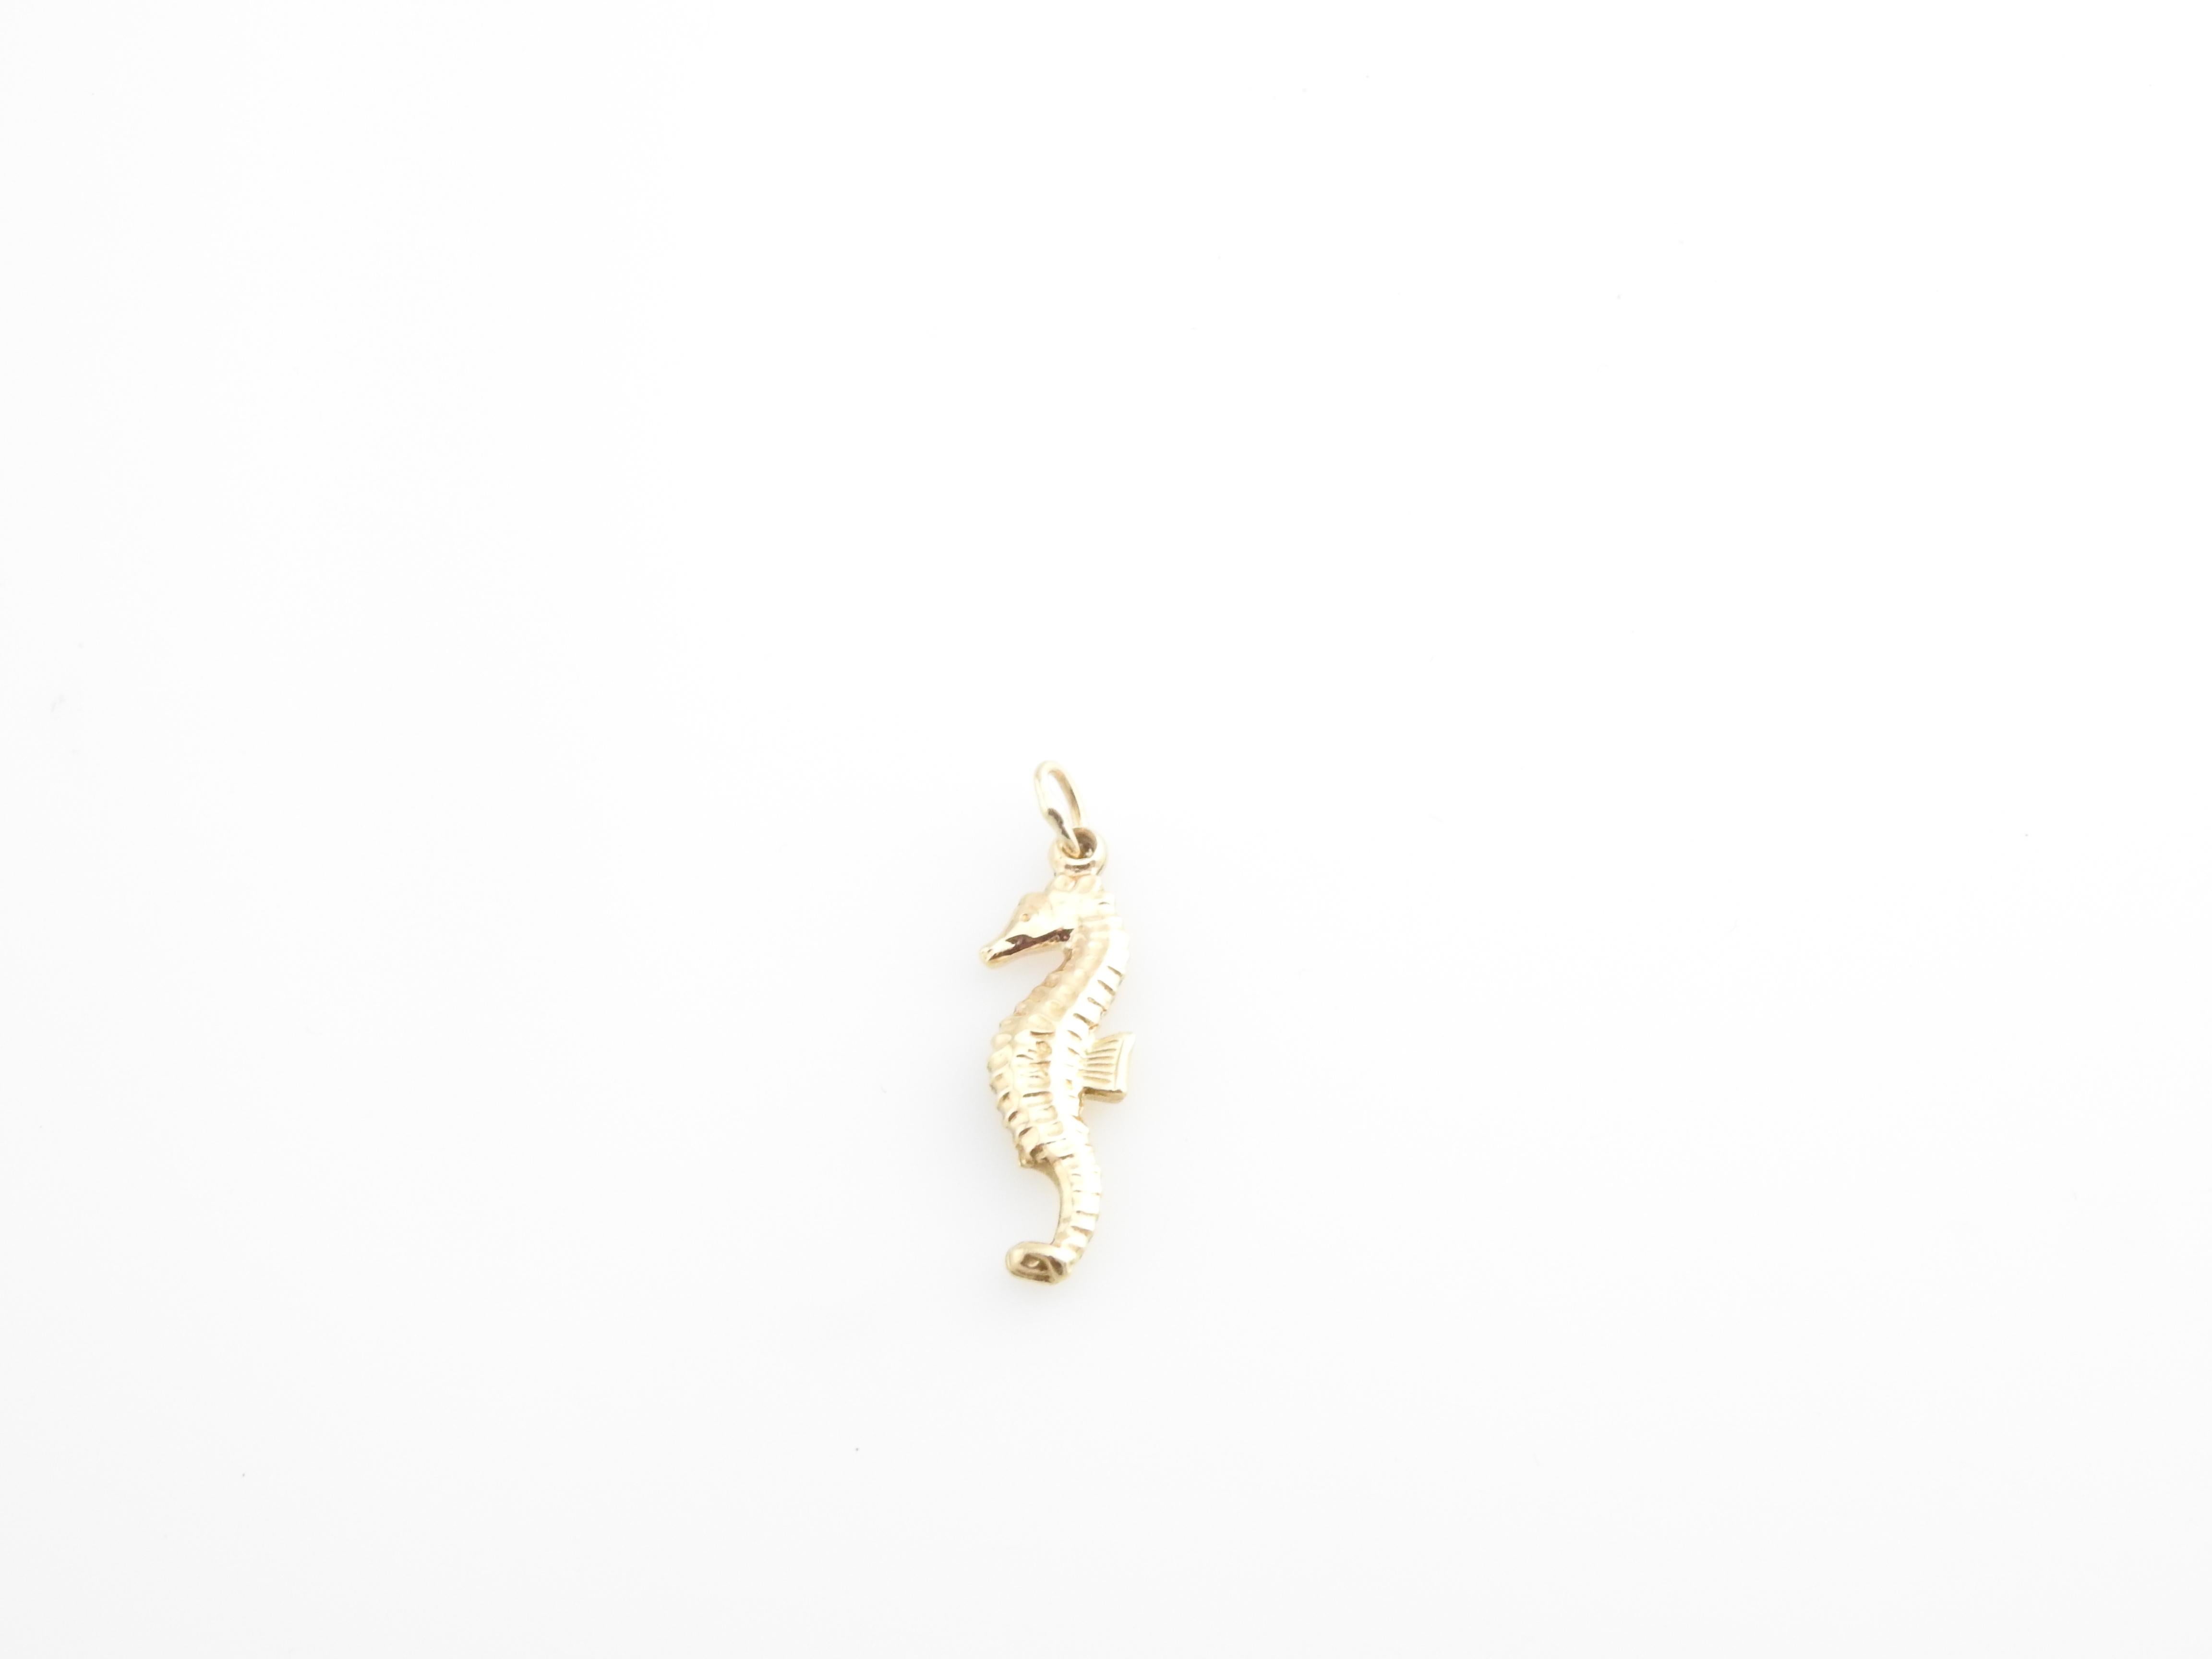 Vintage 14 Karat Yellow Gold Seahorse Charm

The seahorse symbolizes strength and protection!

This lovely 3D charm features a miniature seahorse meticulously detailed in 14K yellow gold.

Size: 23 mm x 7 mm actual charm

Weight: 0.7 dwt. / 1.1